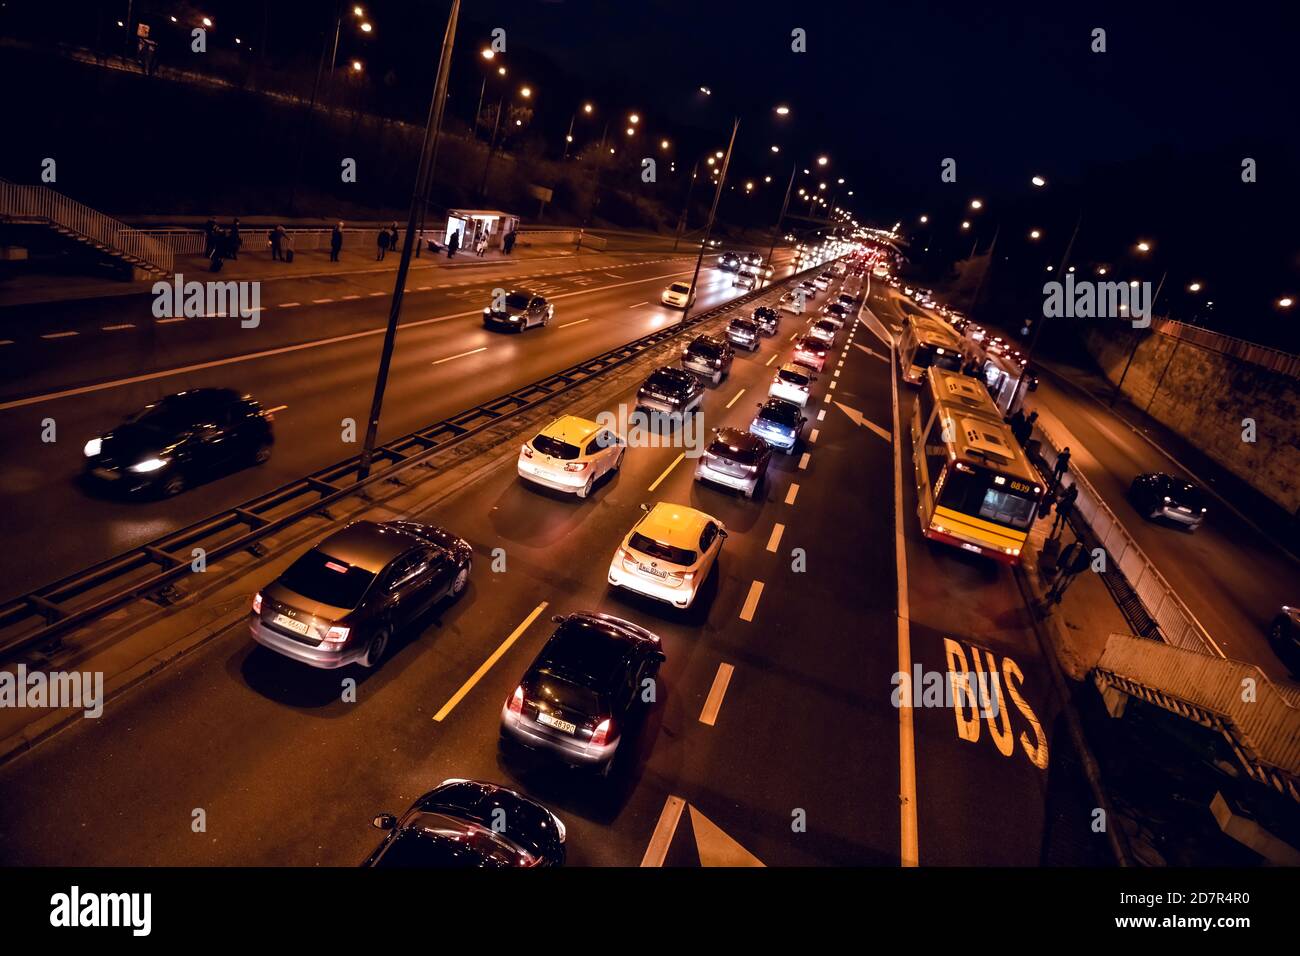 Warsaw, Poland - December 20, 2019: Above high angle aerial Dutch angle view of Aleja Armii Ludowej street avenue in Warszawa at night with traffic ca Stock Photo